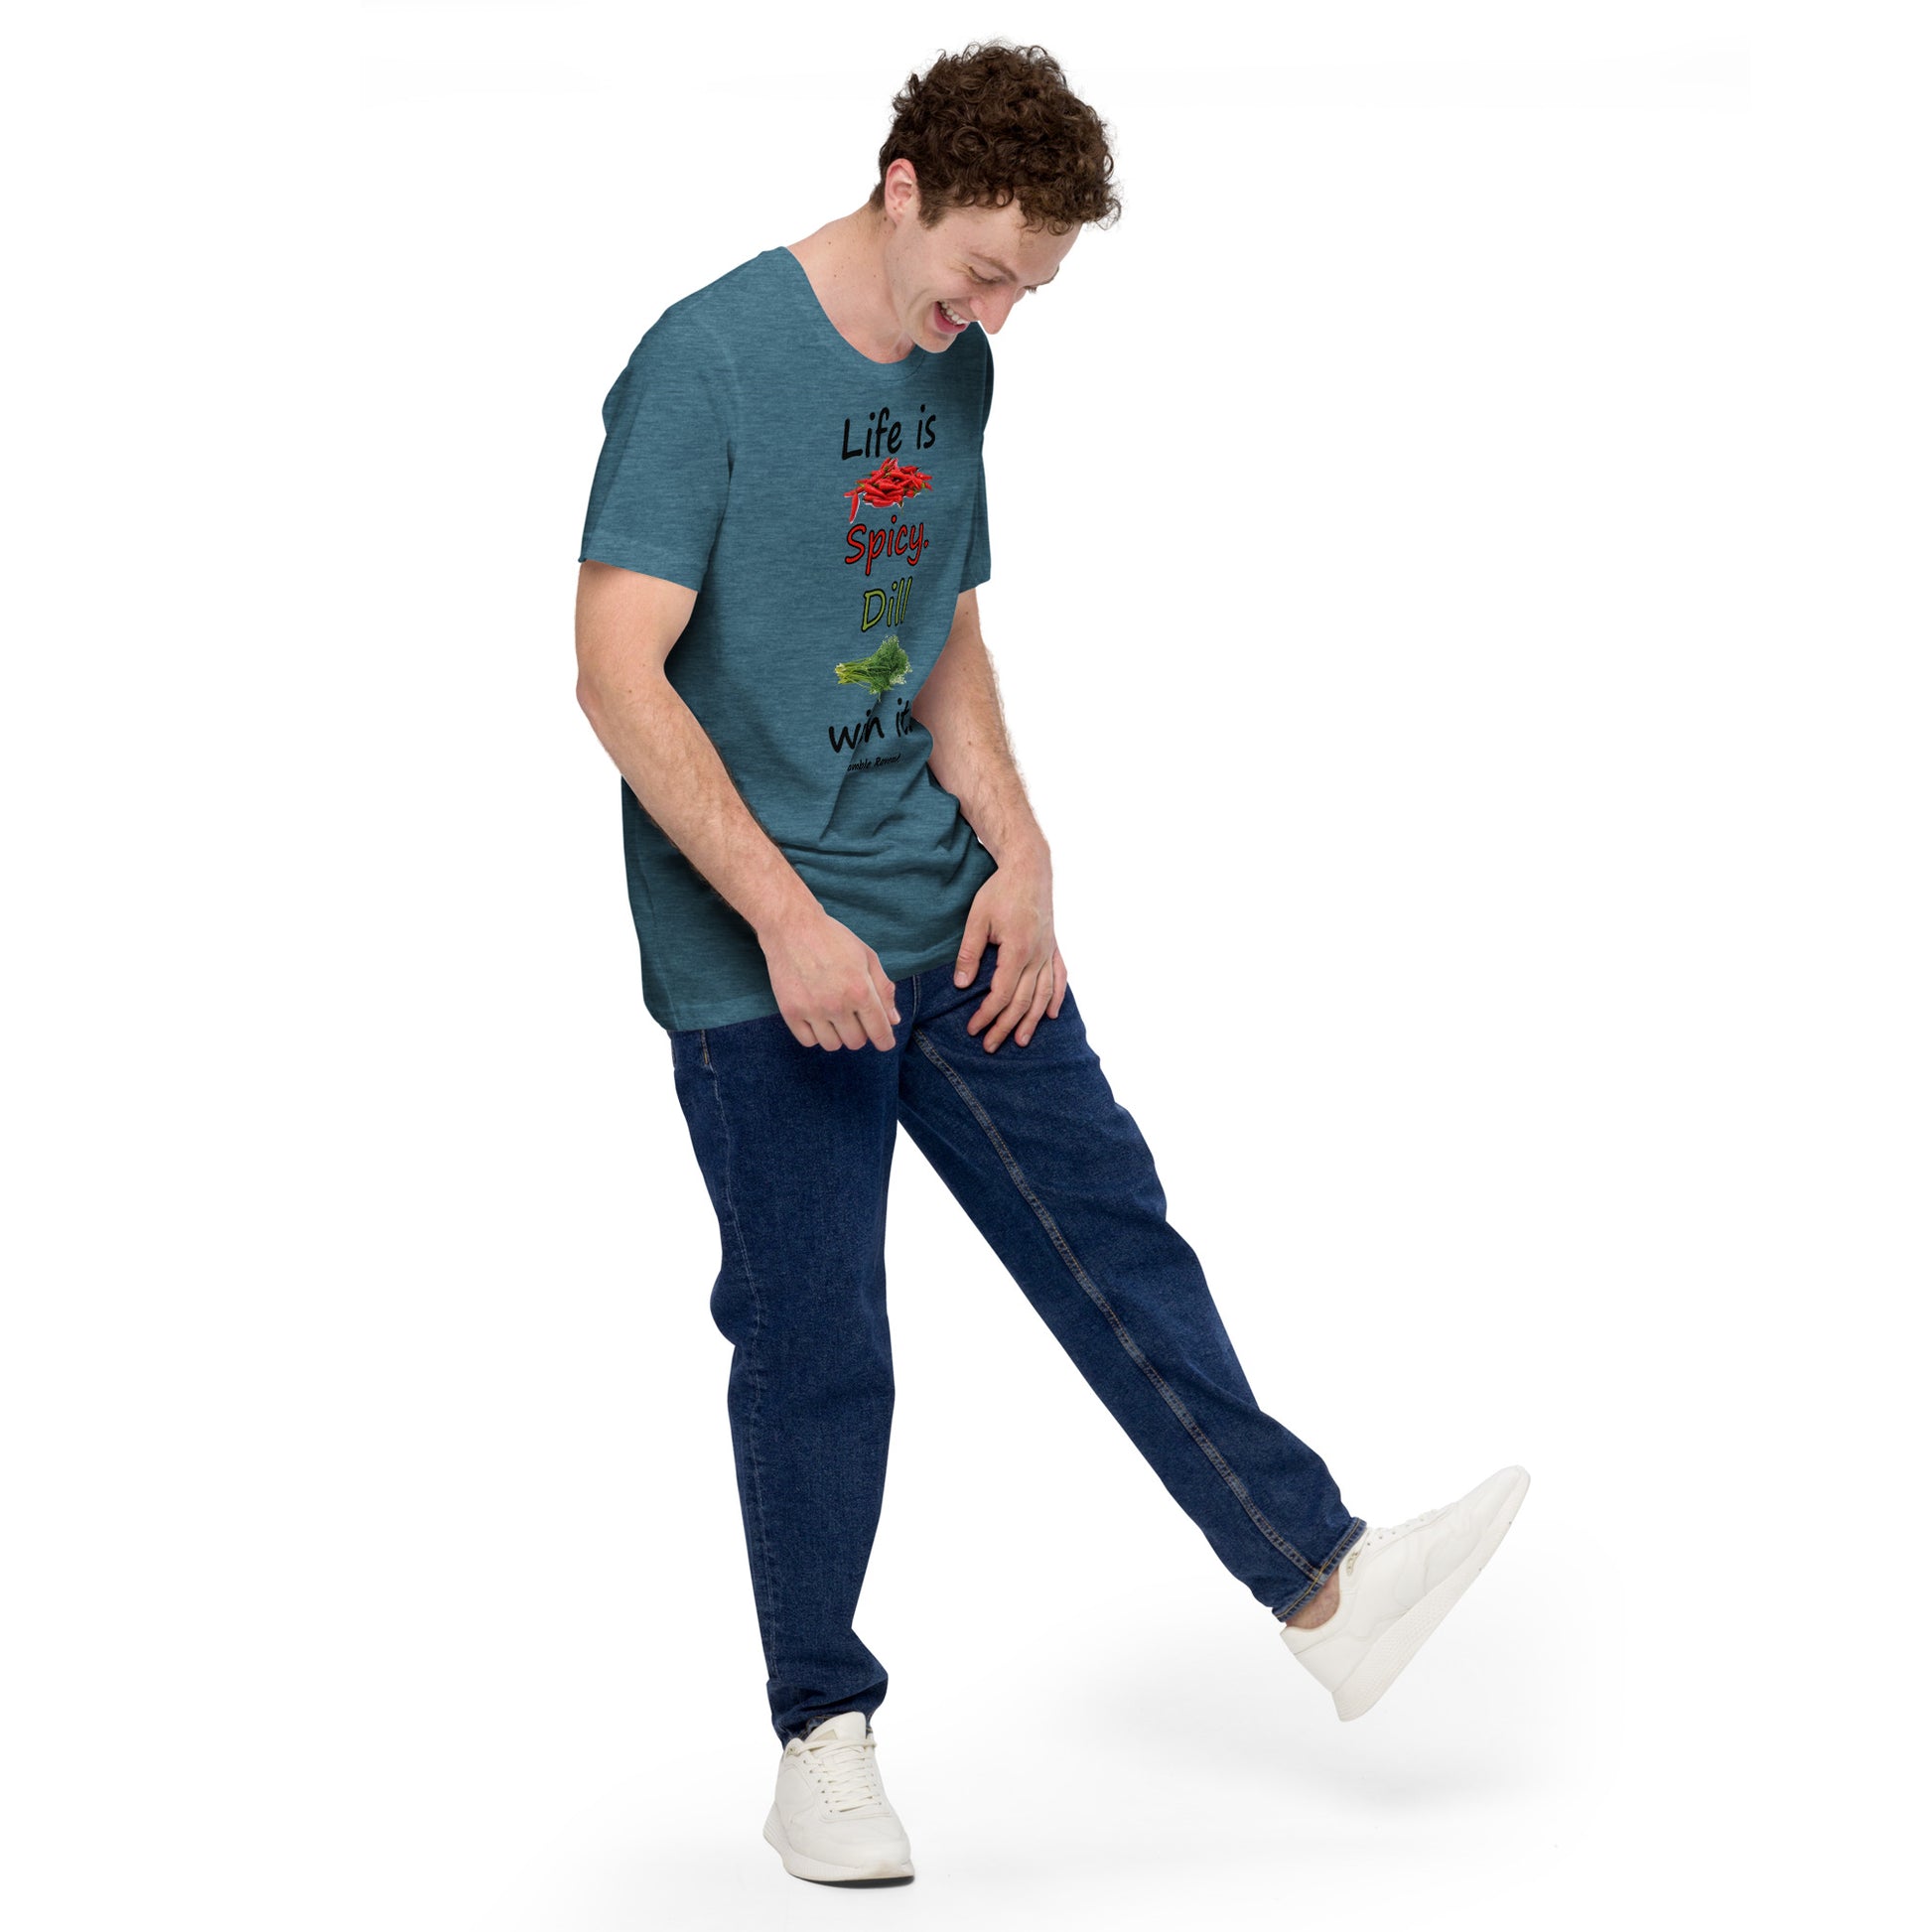 Heather deep teal colored unisex t-shirt. Features text: Life is Spicy. Dill with it. Graphic of chili peppers and dill weed. Made of preshrunk cotton with side seams. Shown on male model facing right.